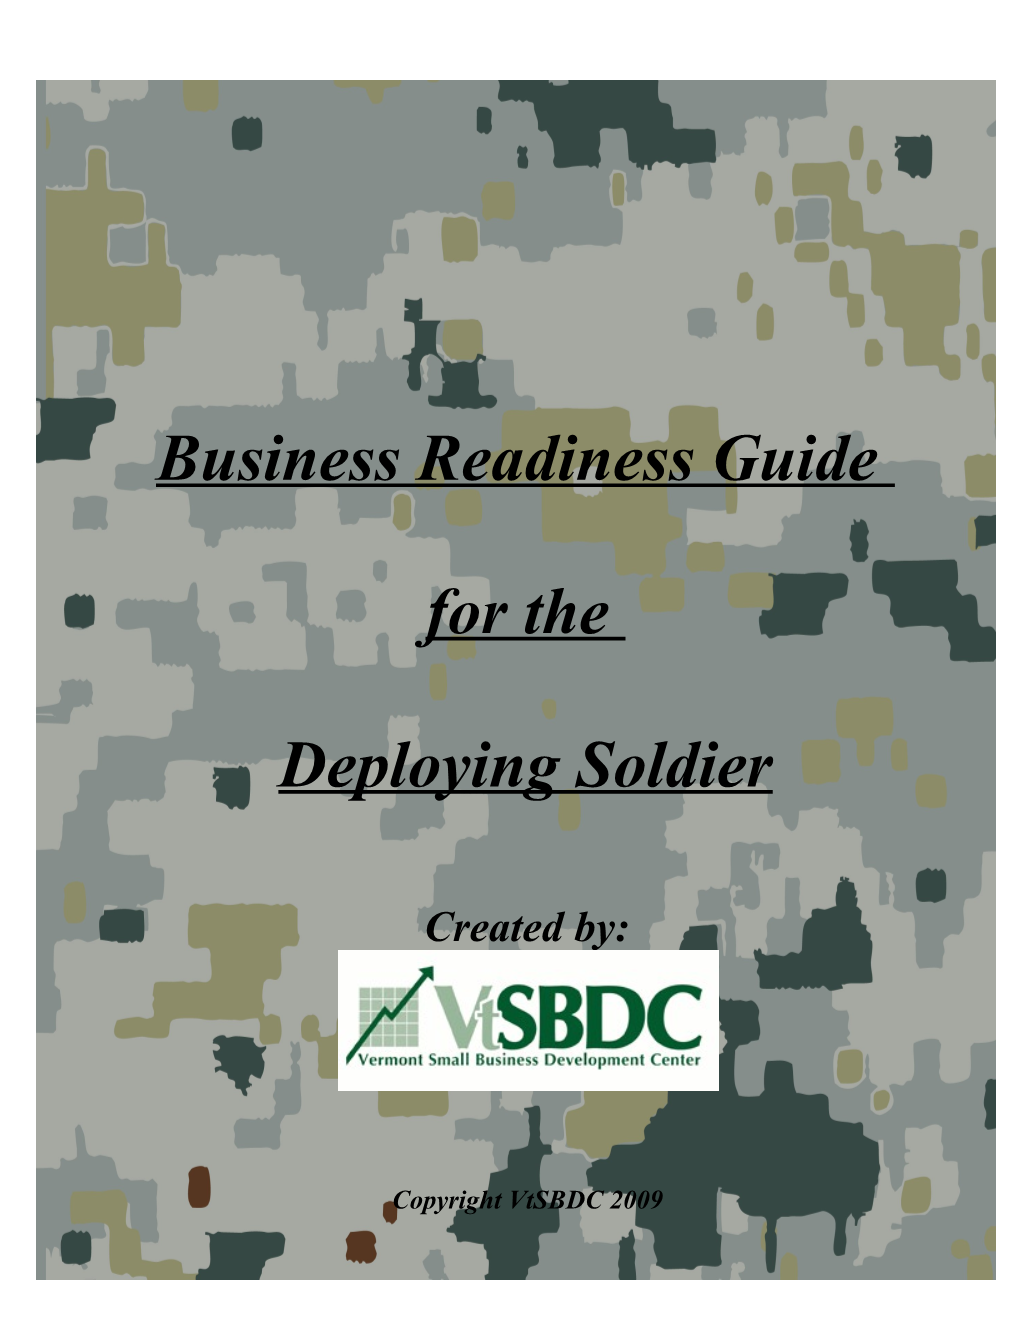 Business Readiness Guide for the Deploying Soldier